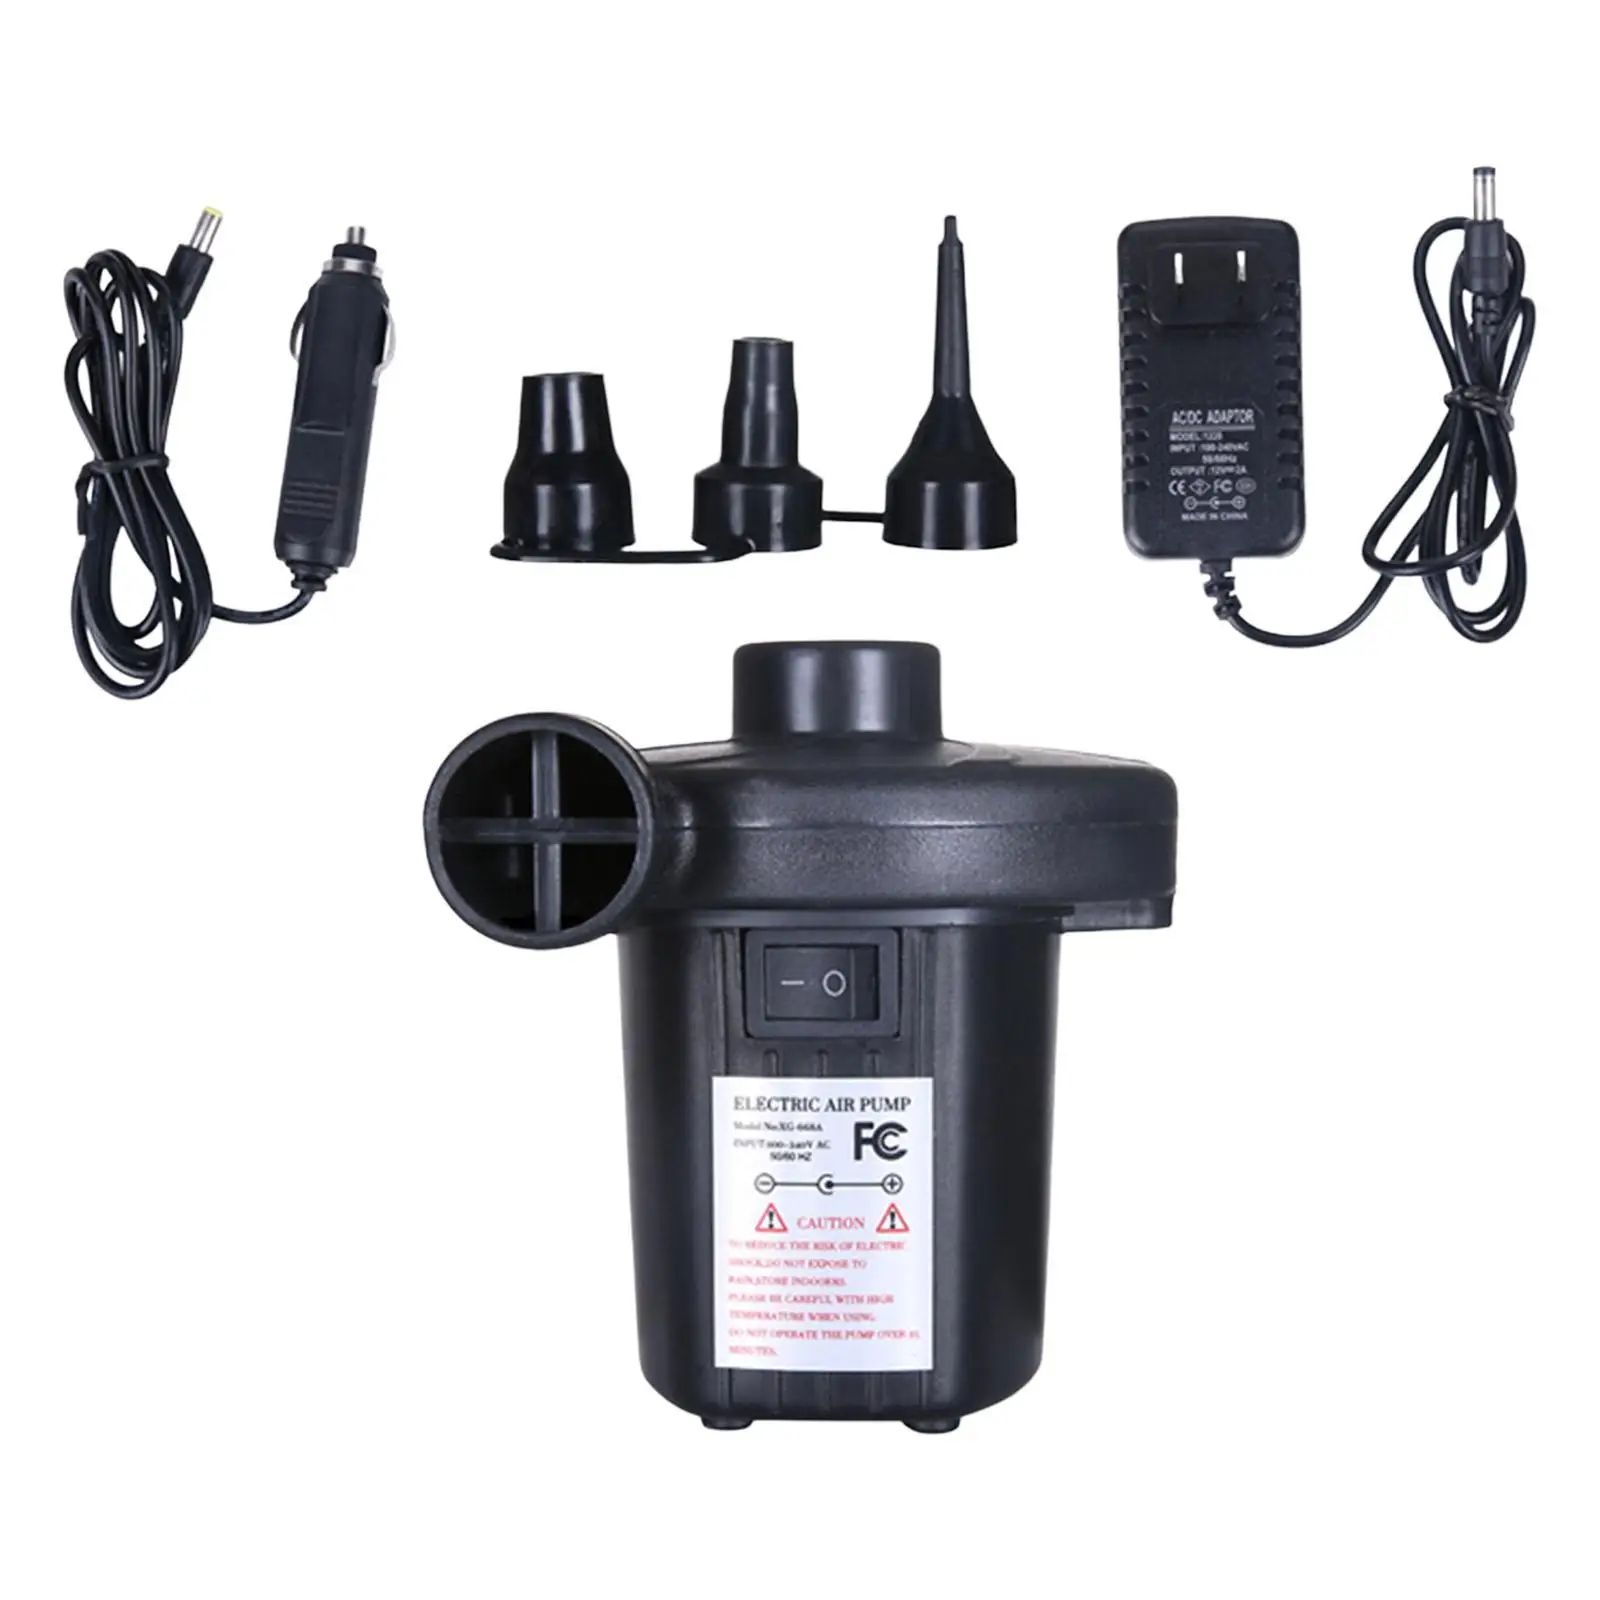 Portable Electric Air Pump with 3 Heads Nozzle  Inflator Deflate for Air Beds